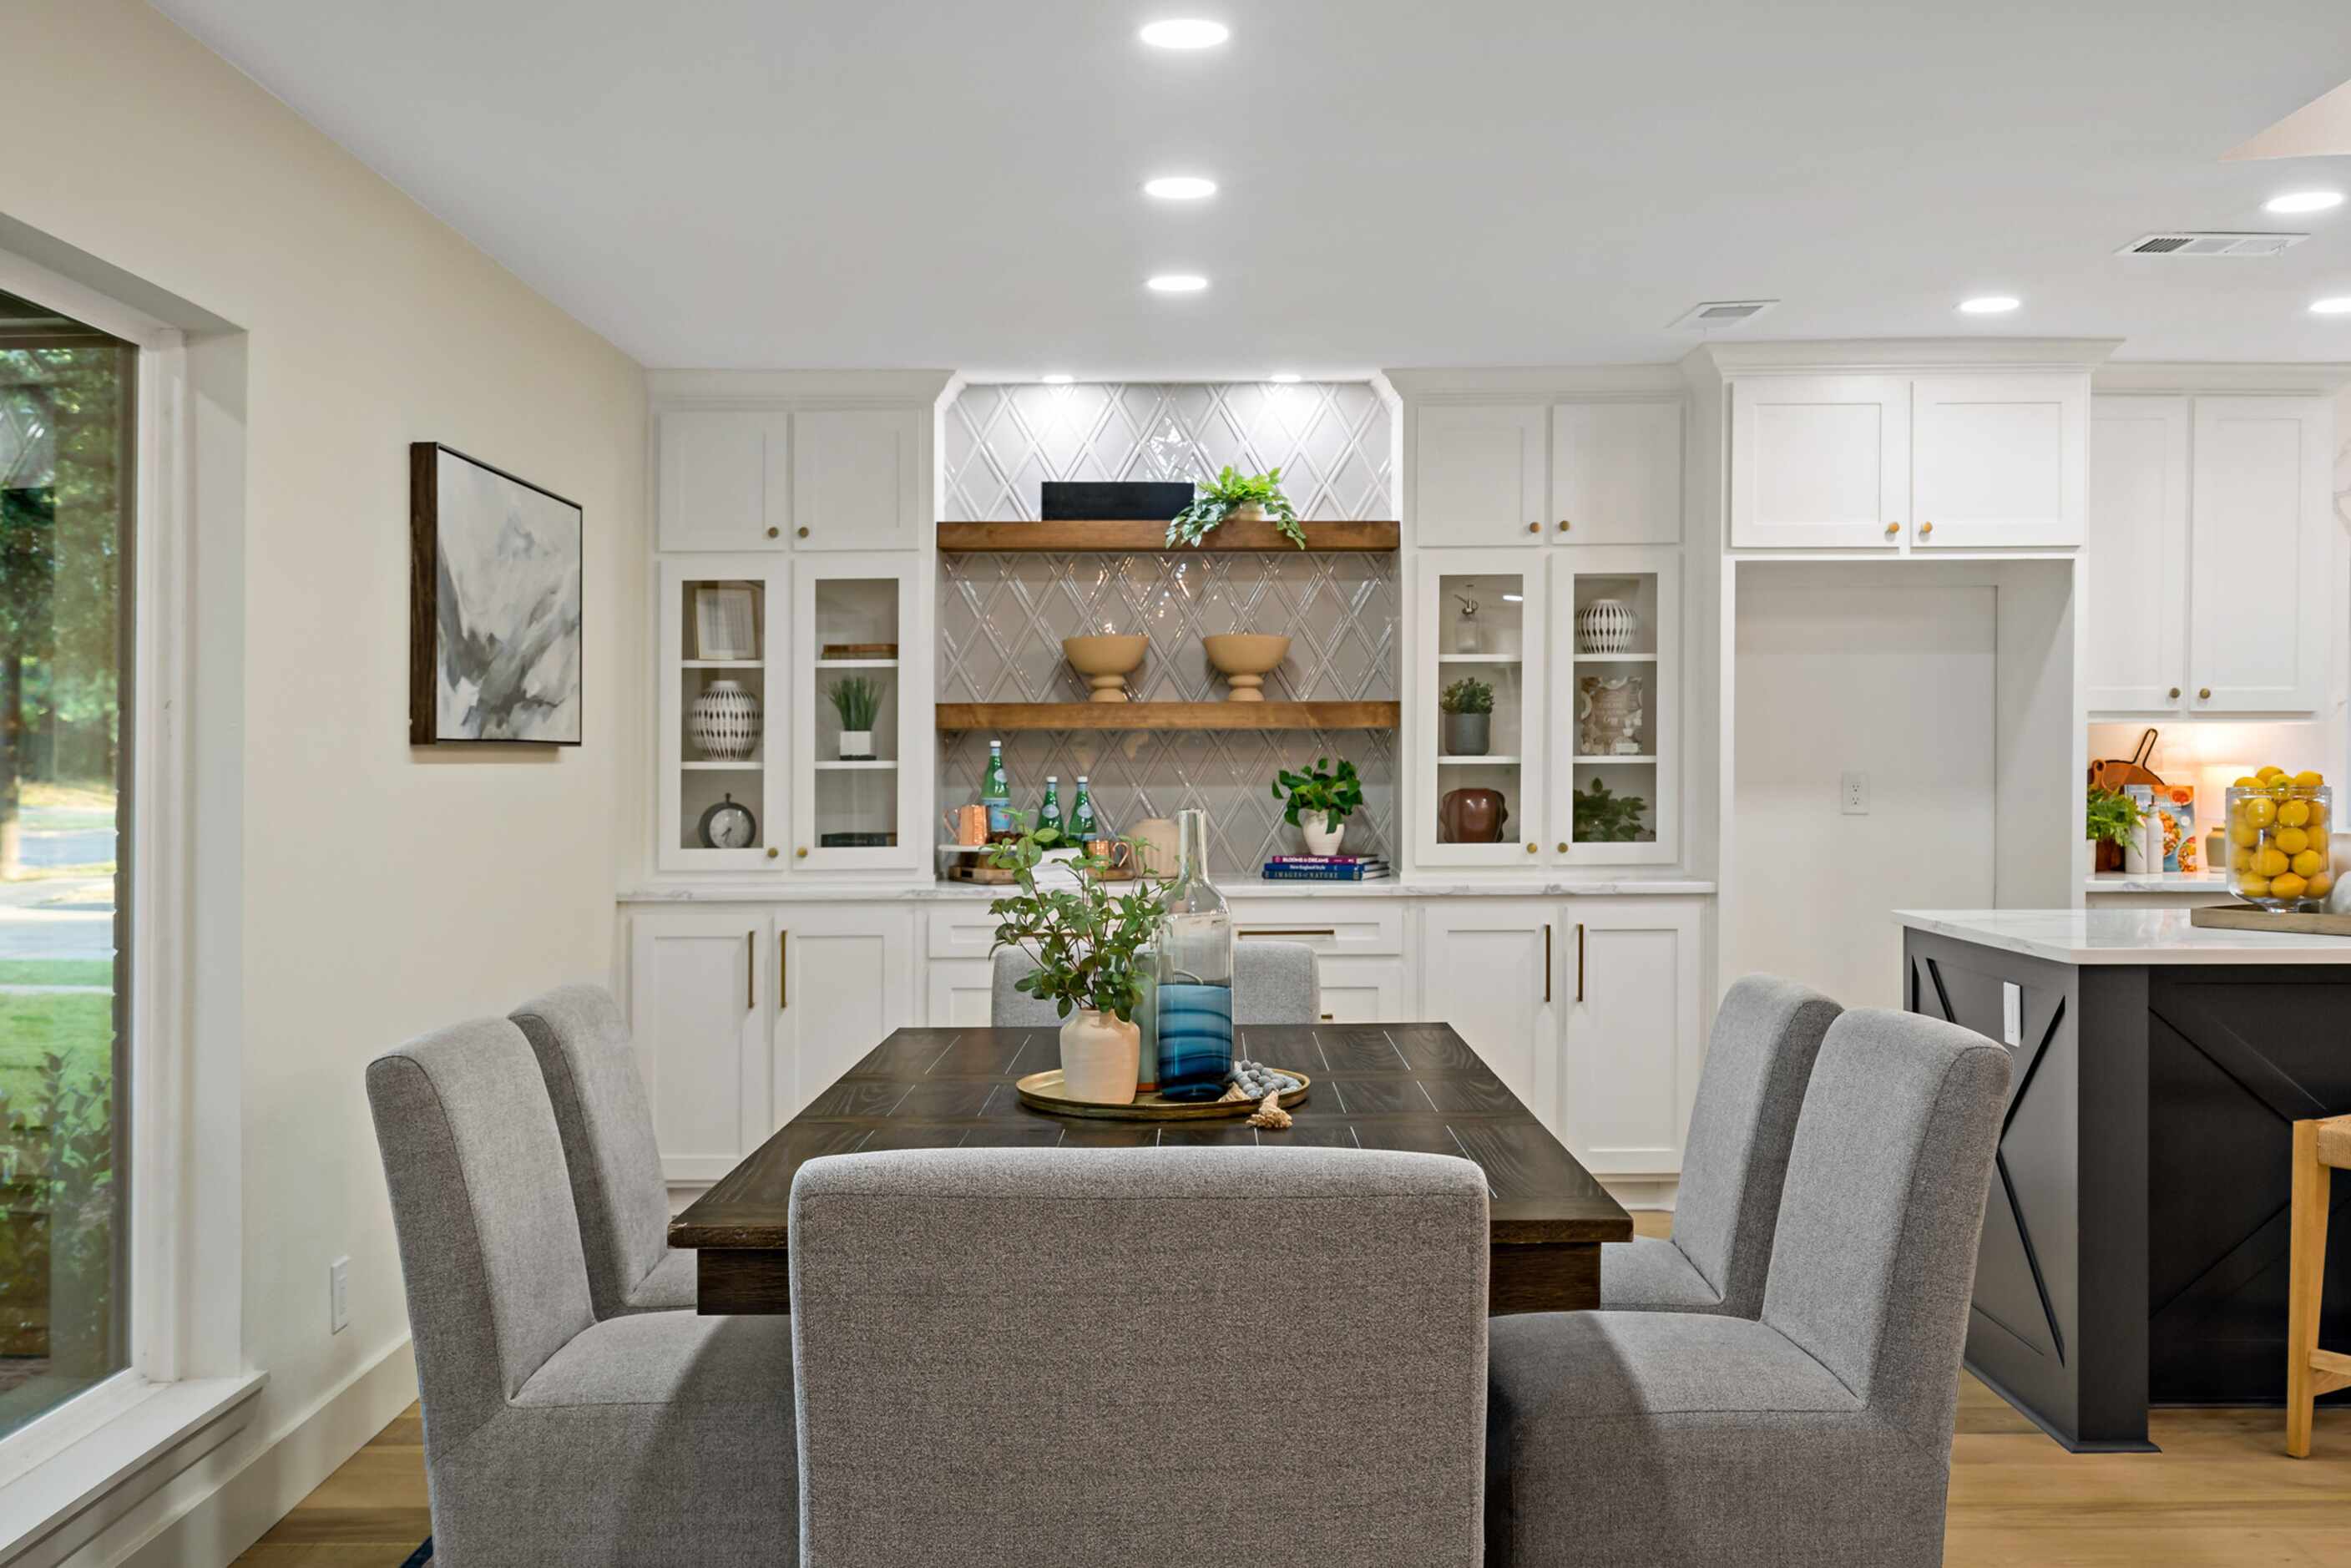 Dining table with gray chairs, white built-in cabinetry in the background